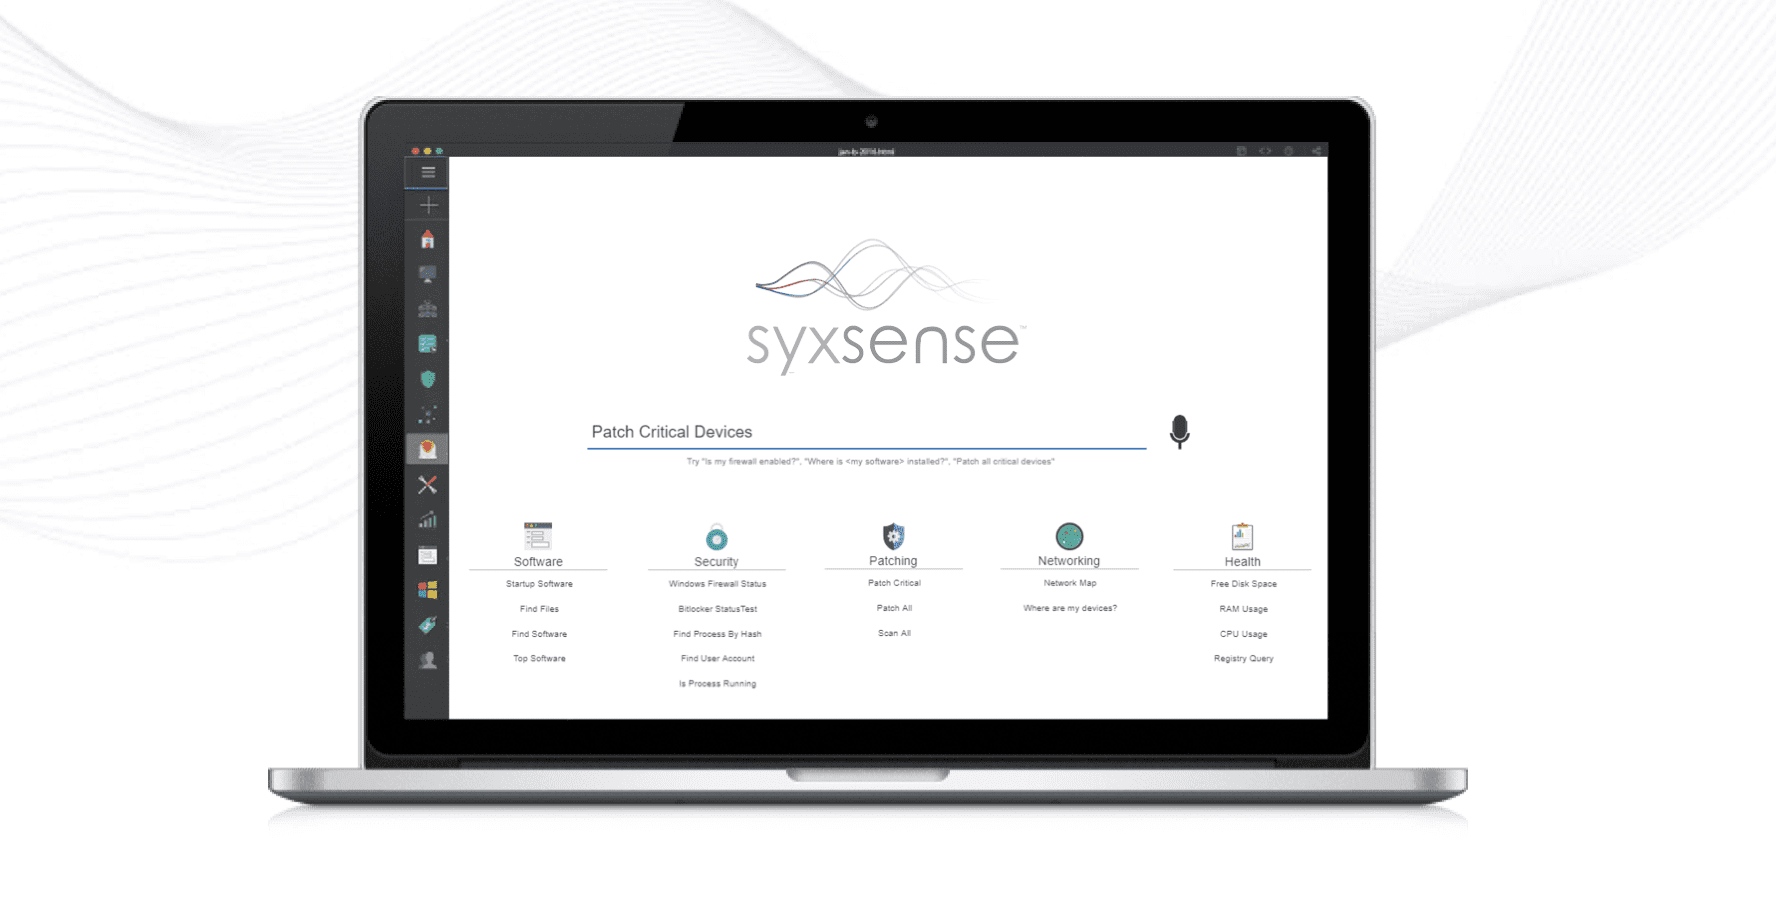 Verismic Software Launches Rebrand to Syxsense and New Product Offerings, Reinforcing its Mission to Strengthen Endpoint Security